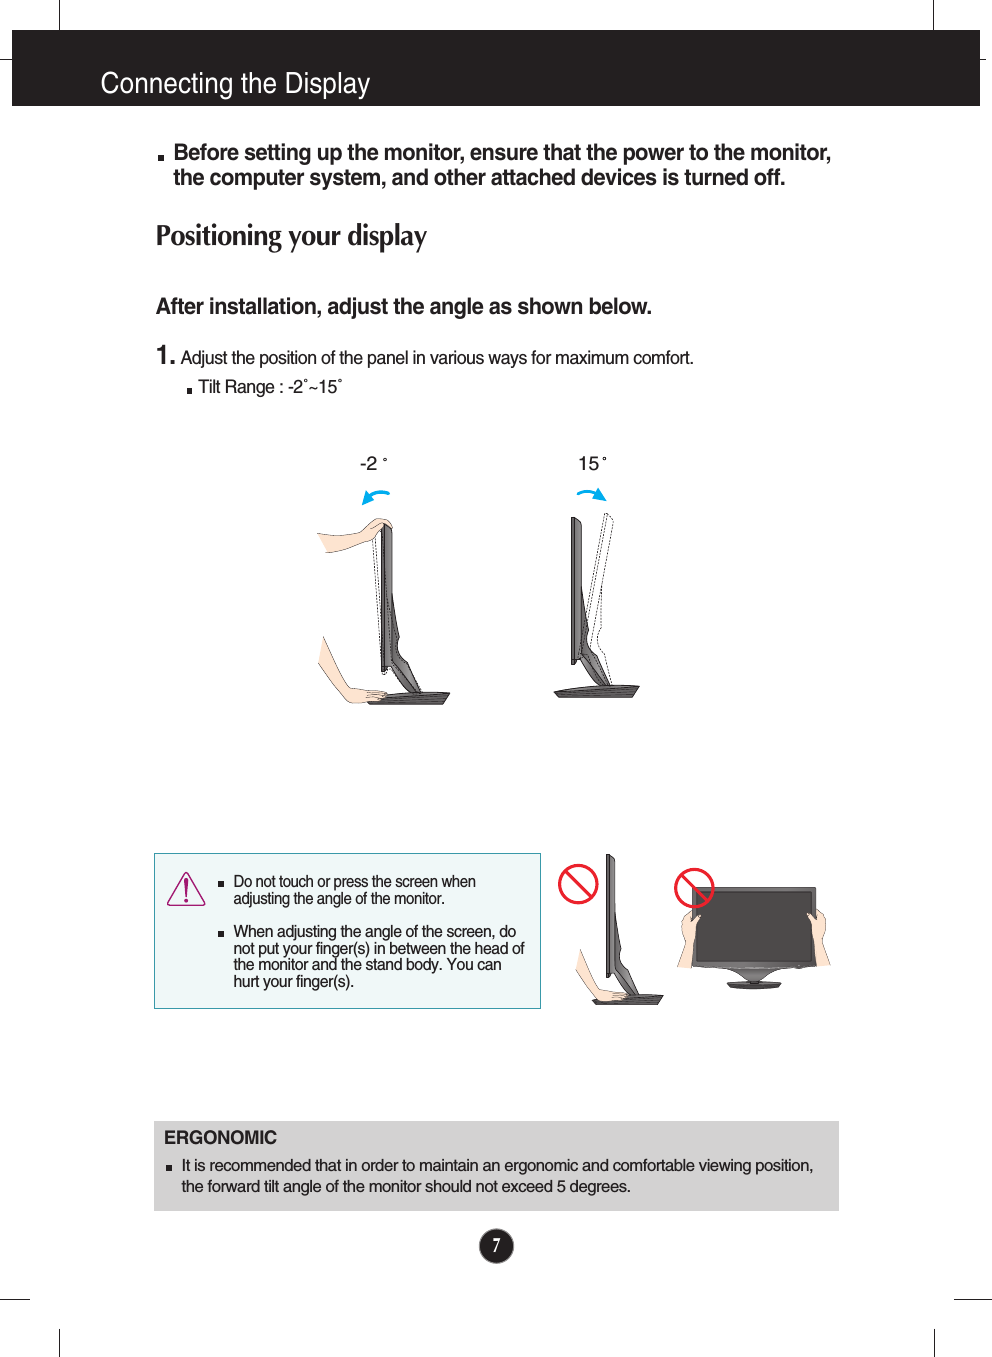 7Connecting the DisplayBefore setting up the monitor, ensure that the power to the monitor,the computer system, and other attached devices is turned off. Positioning your displayAfter installation, adjust the angle as shown below. 1. Adjust the position of the panel in various ways for maximum comfort.Tilt Range : -2˚~15˚                            ERGONOMICIt is recommended that in order to maintain an ergonomic and comfortable viewing position,the forward tilt angle of the monitor should not exceed 5 degrees.15-2  Do not touch or press the screen whenadjusting the angle of the monitor. When adjusting the angle of the screen, donot put your finger(s) in between the head ofthe monitor and the stand body. You canhurt your finger(s).